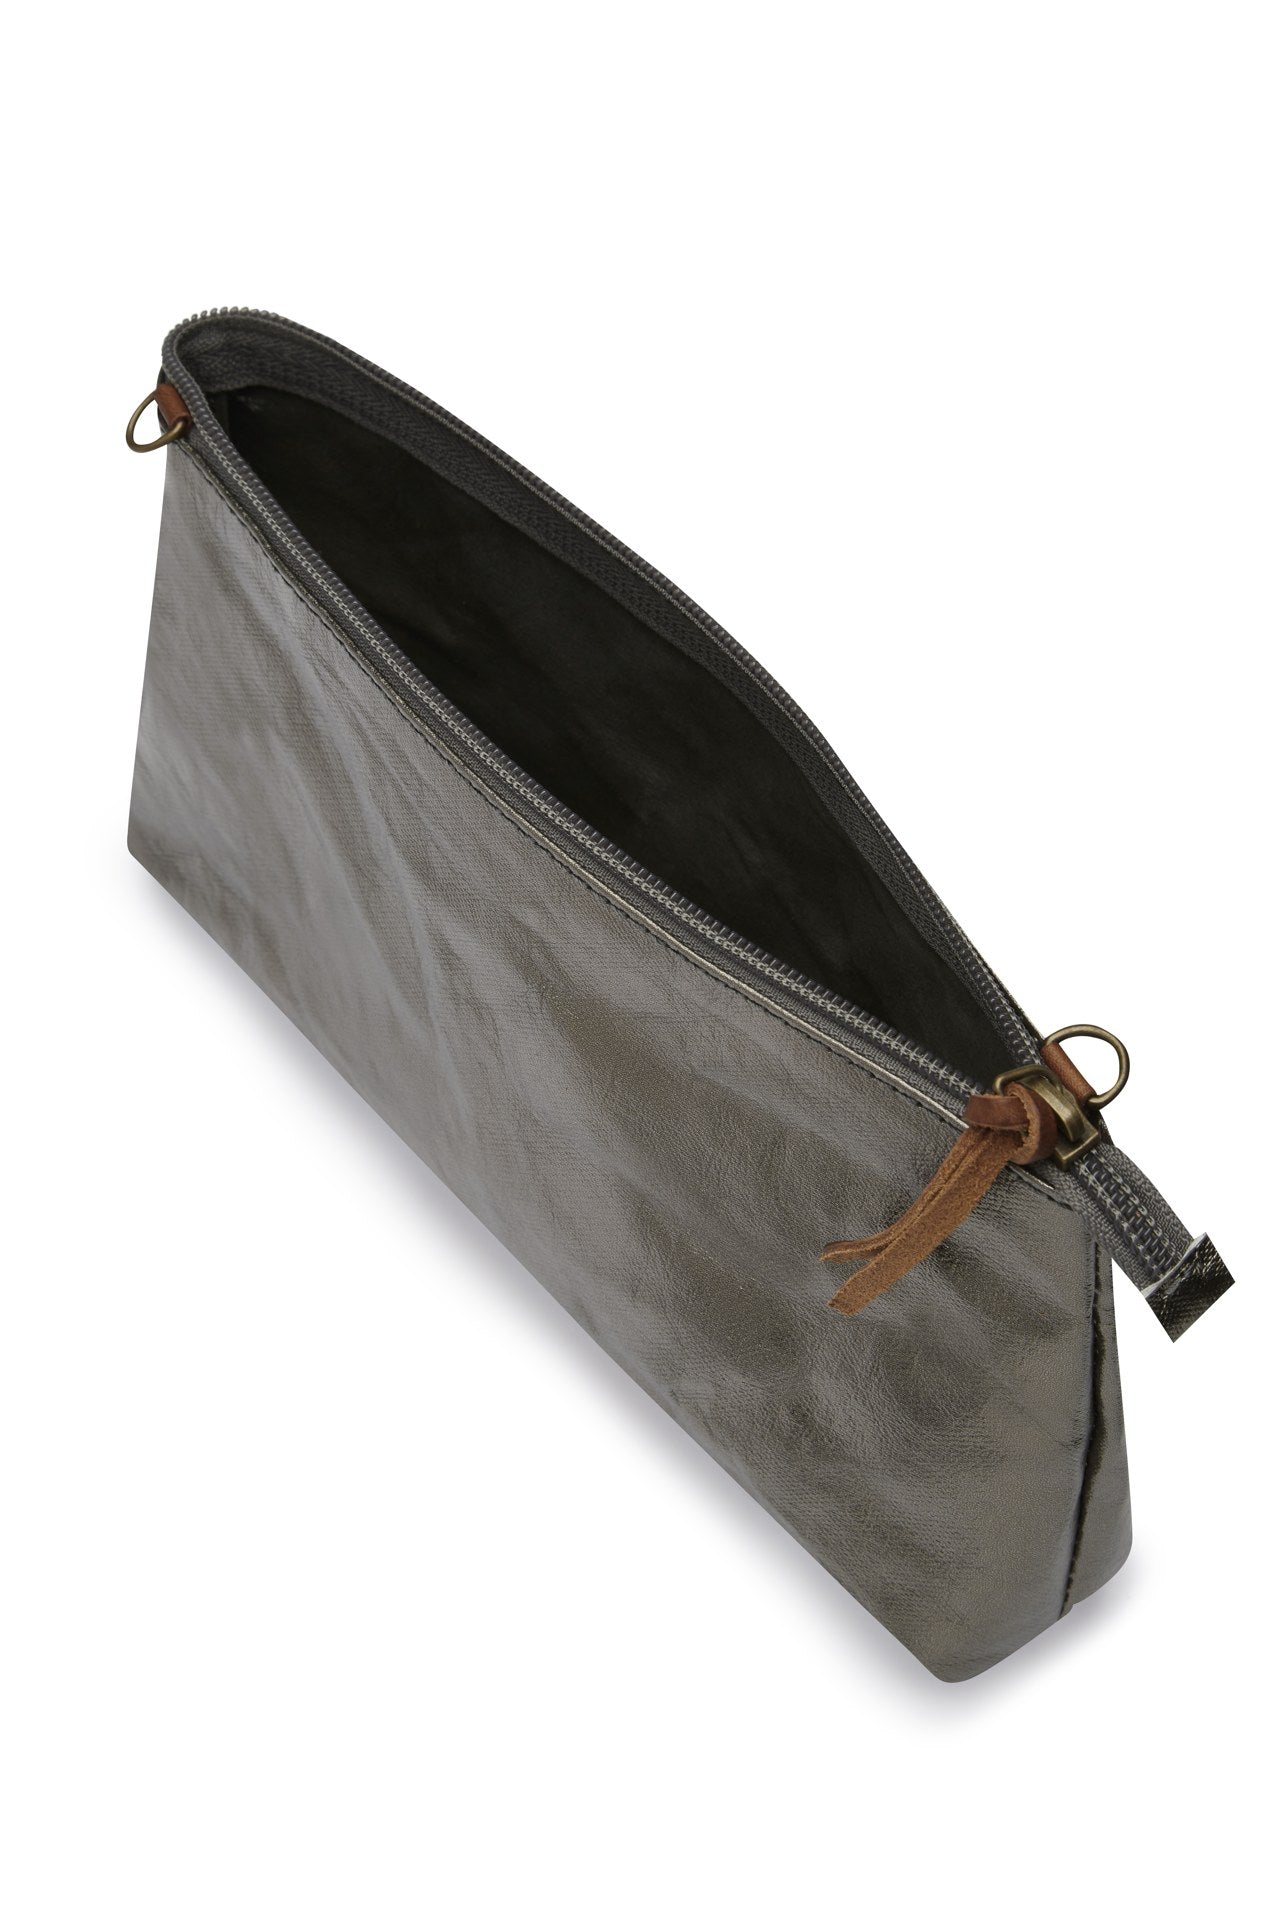 A washable paper bag in dark grey is shown with the strap removed, open and unzipped with a tan zip toggle.